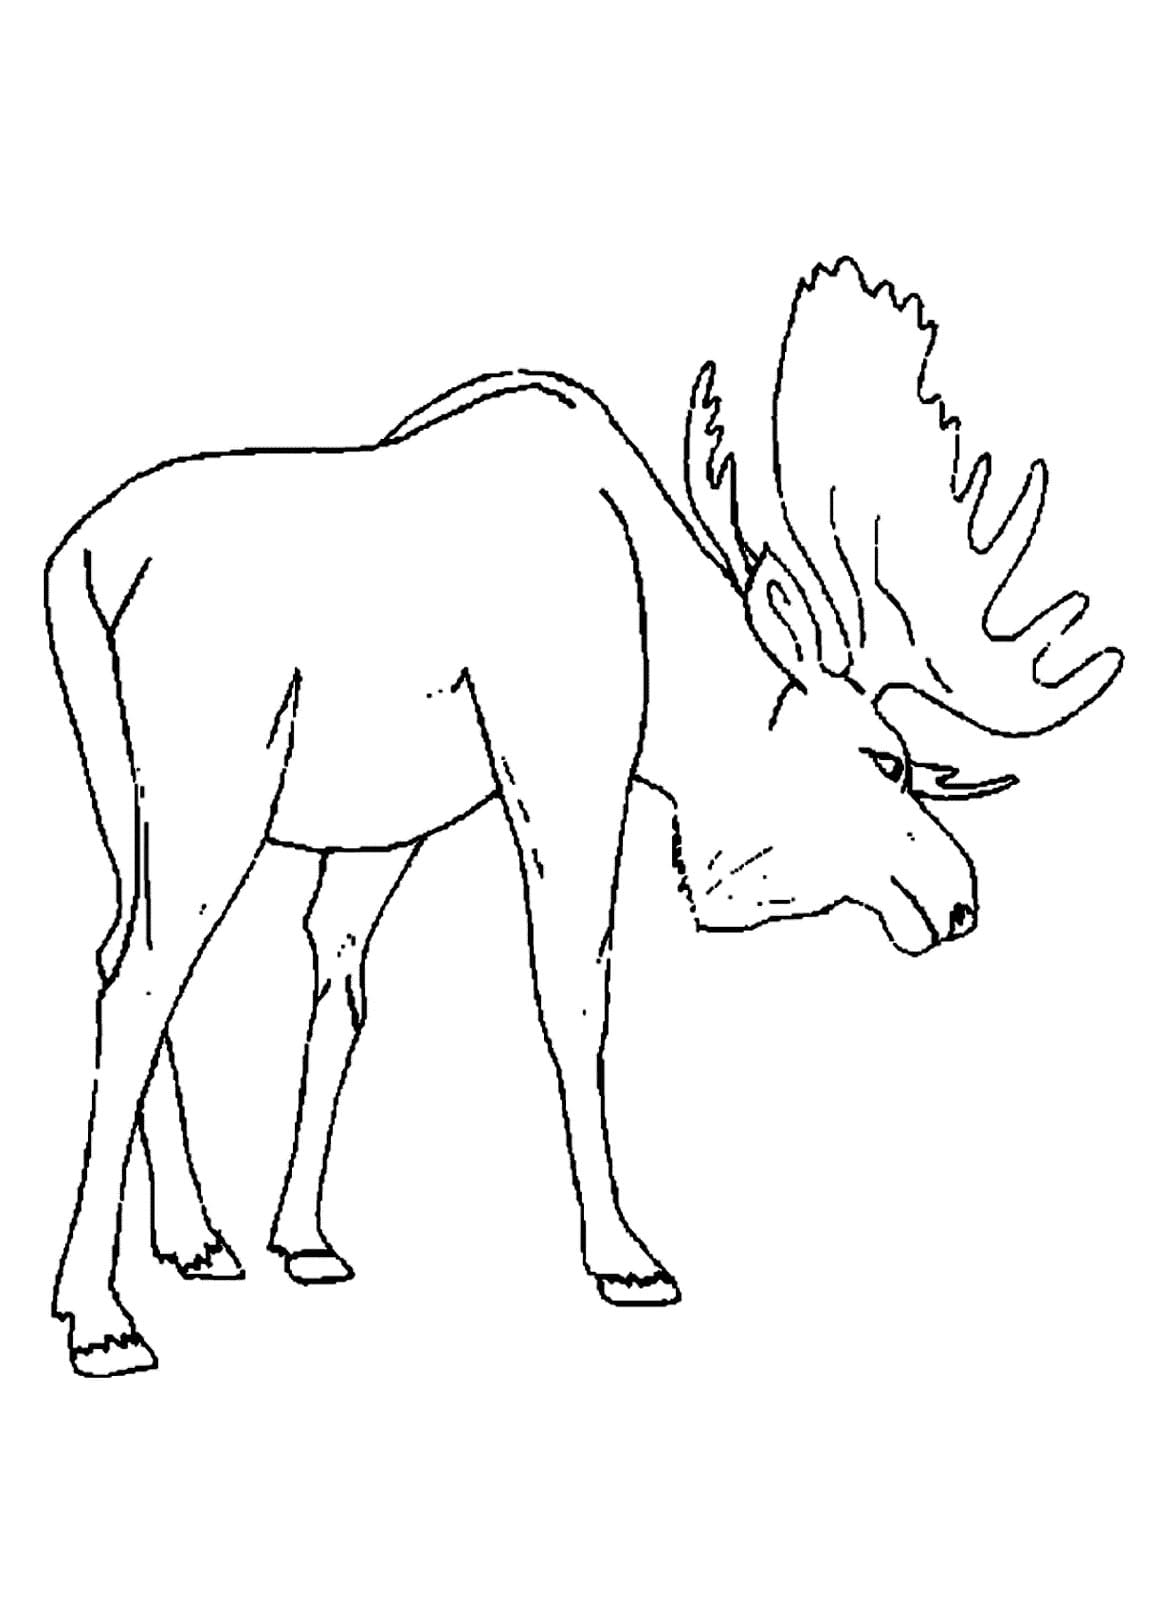 Moose Coloring Pages Image Coloring Page